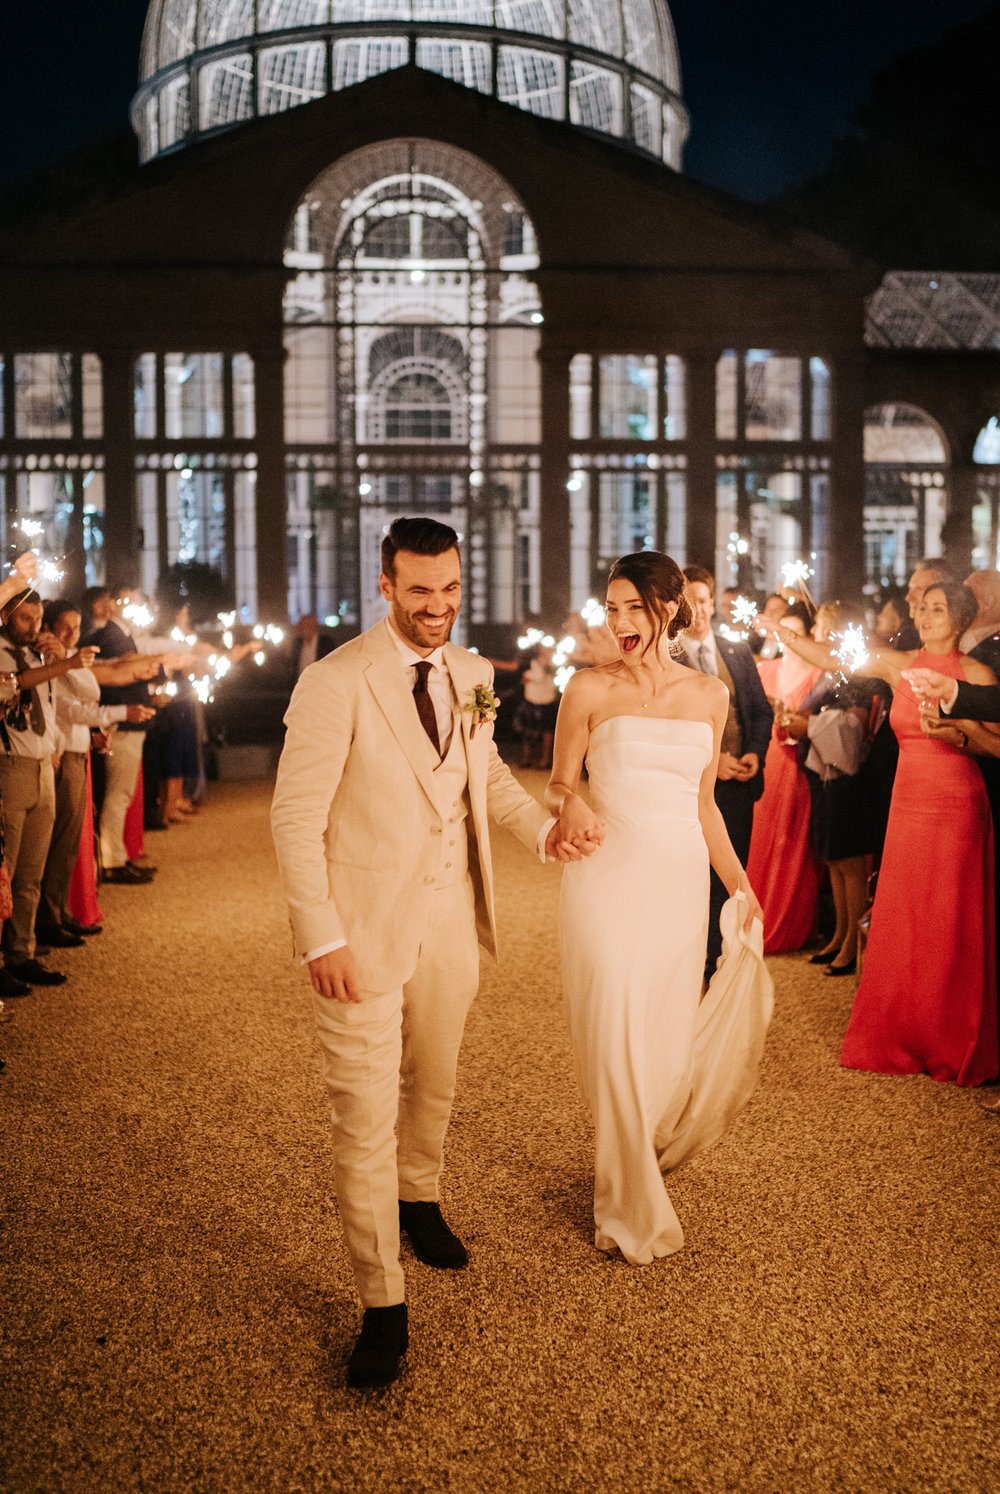 Bride and groom hold hands as they exit Syon Park's Great Conservatory through a sparklers tunnel